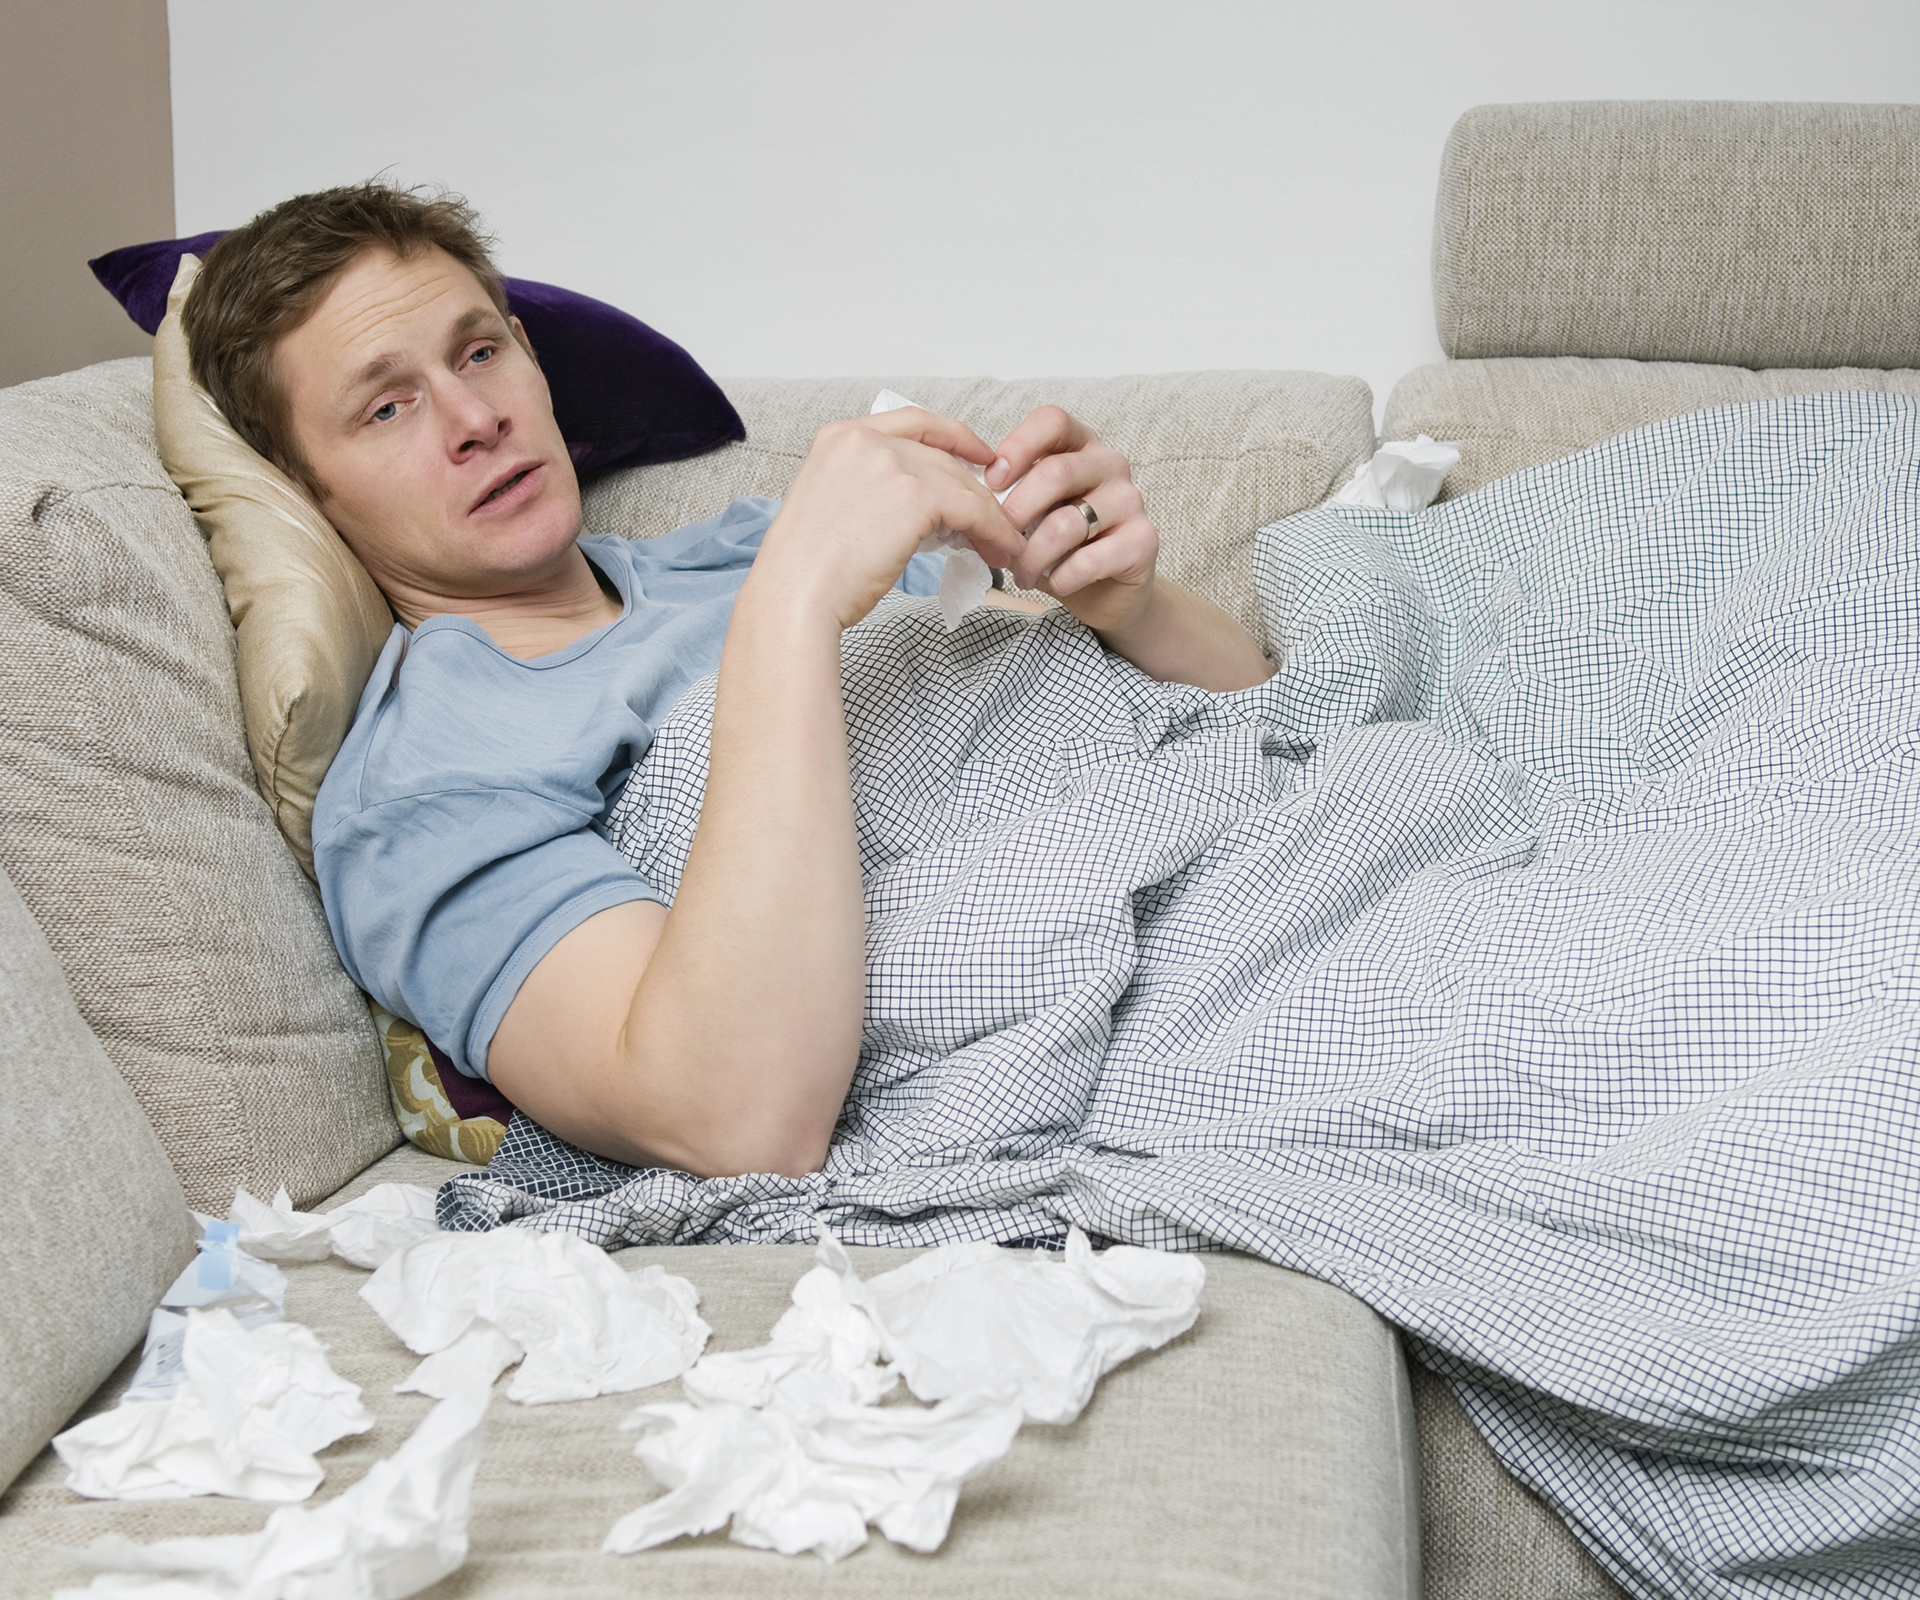 Science says ‘man flu’ could be a real thing